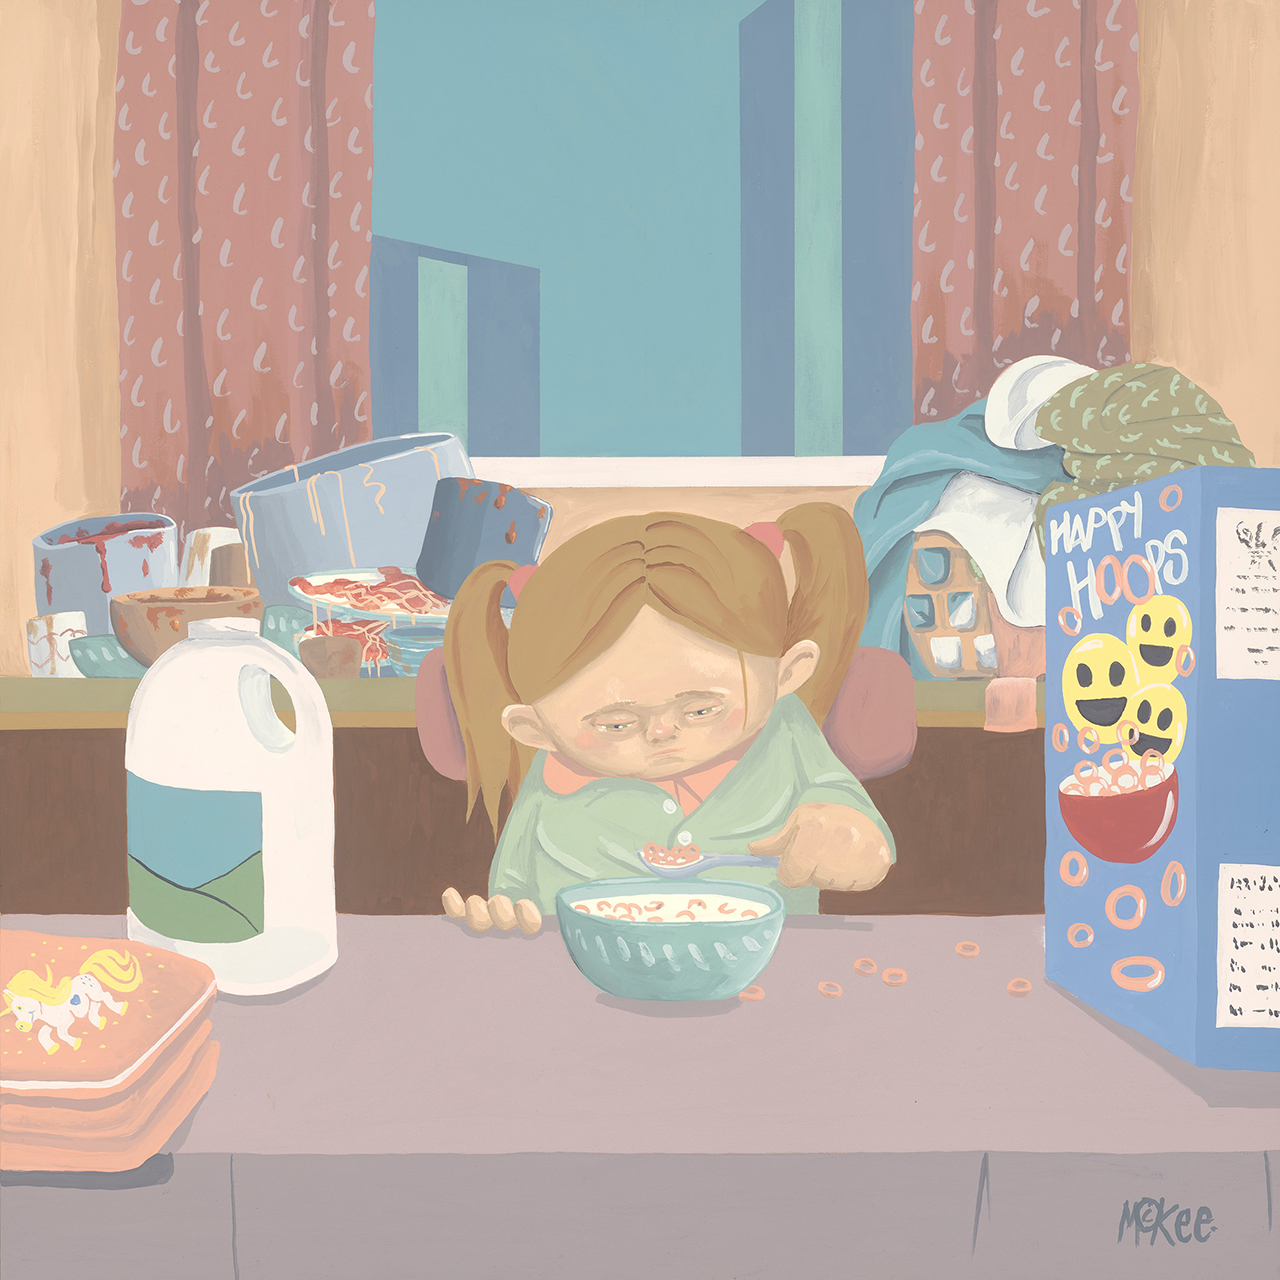 A young child with pigtails and a forlorn expression eats cereal. Behind them is a  collection of unwashed dishes and an overflowing laundry basket.